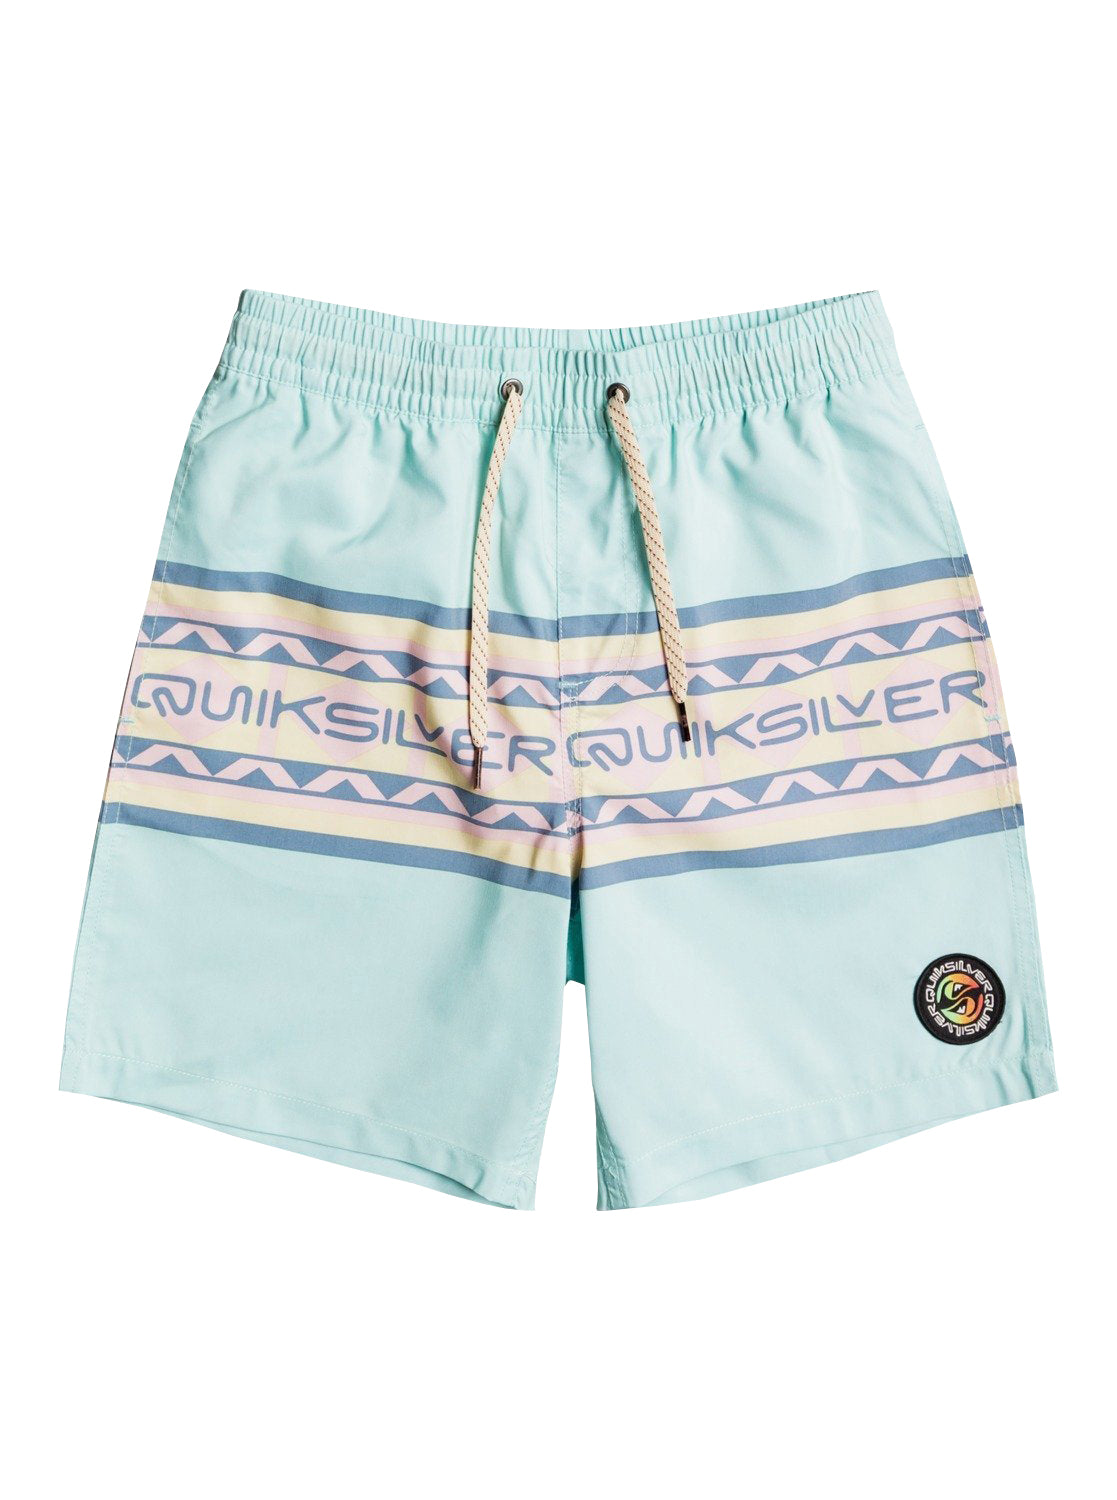 Quiksilver Boys Sun Faded 15" Recycled Volleys